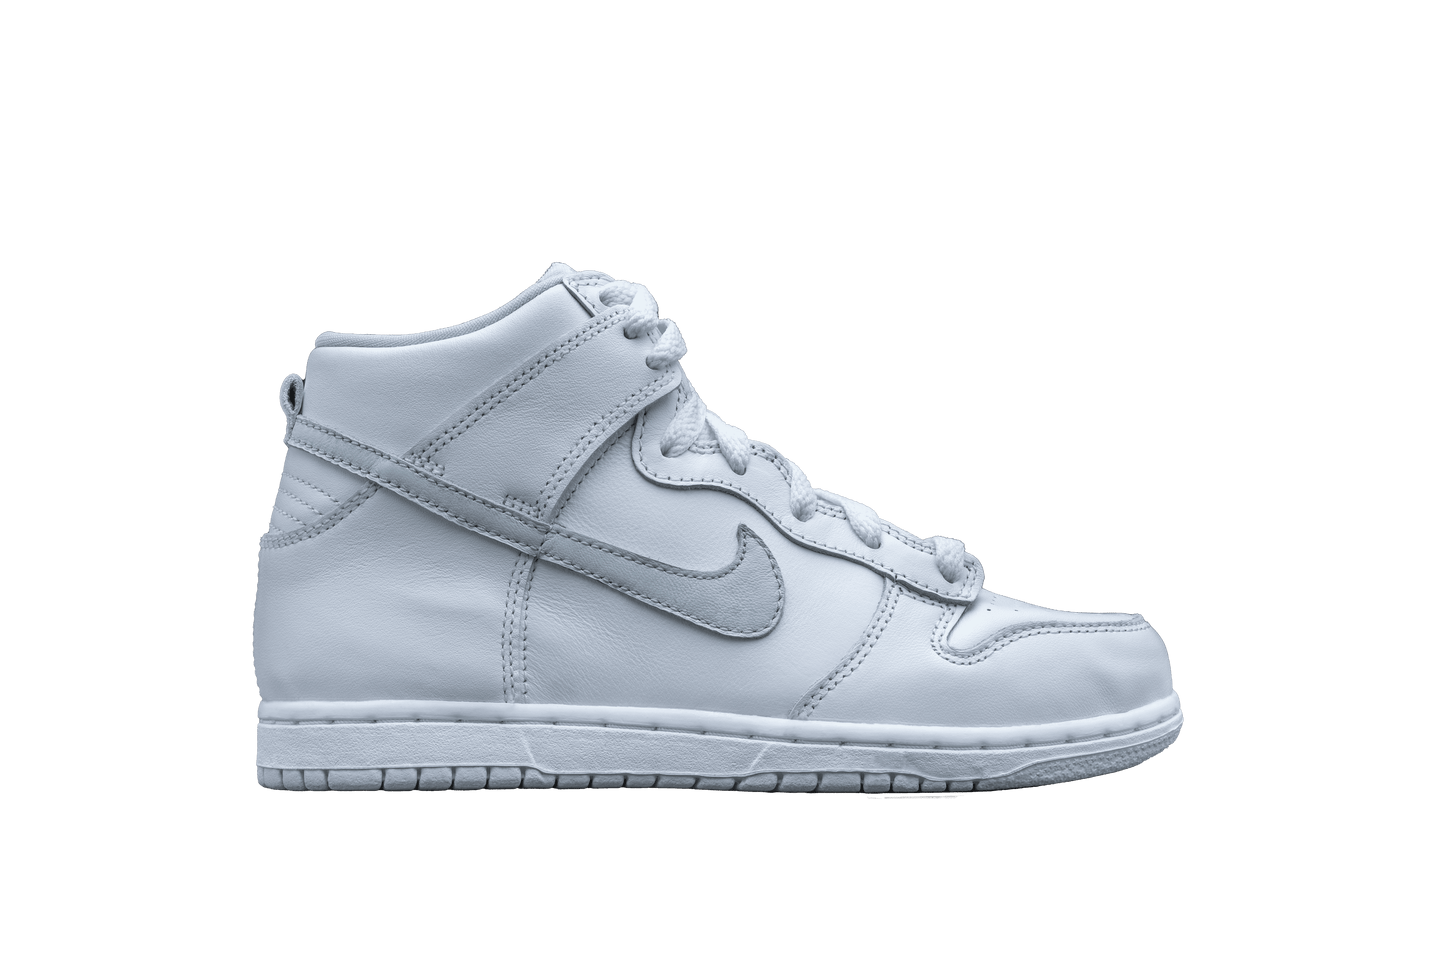 nike Robinson dunk high sp pure platinum ps lo10m 1 1445x